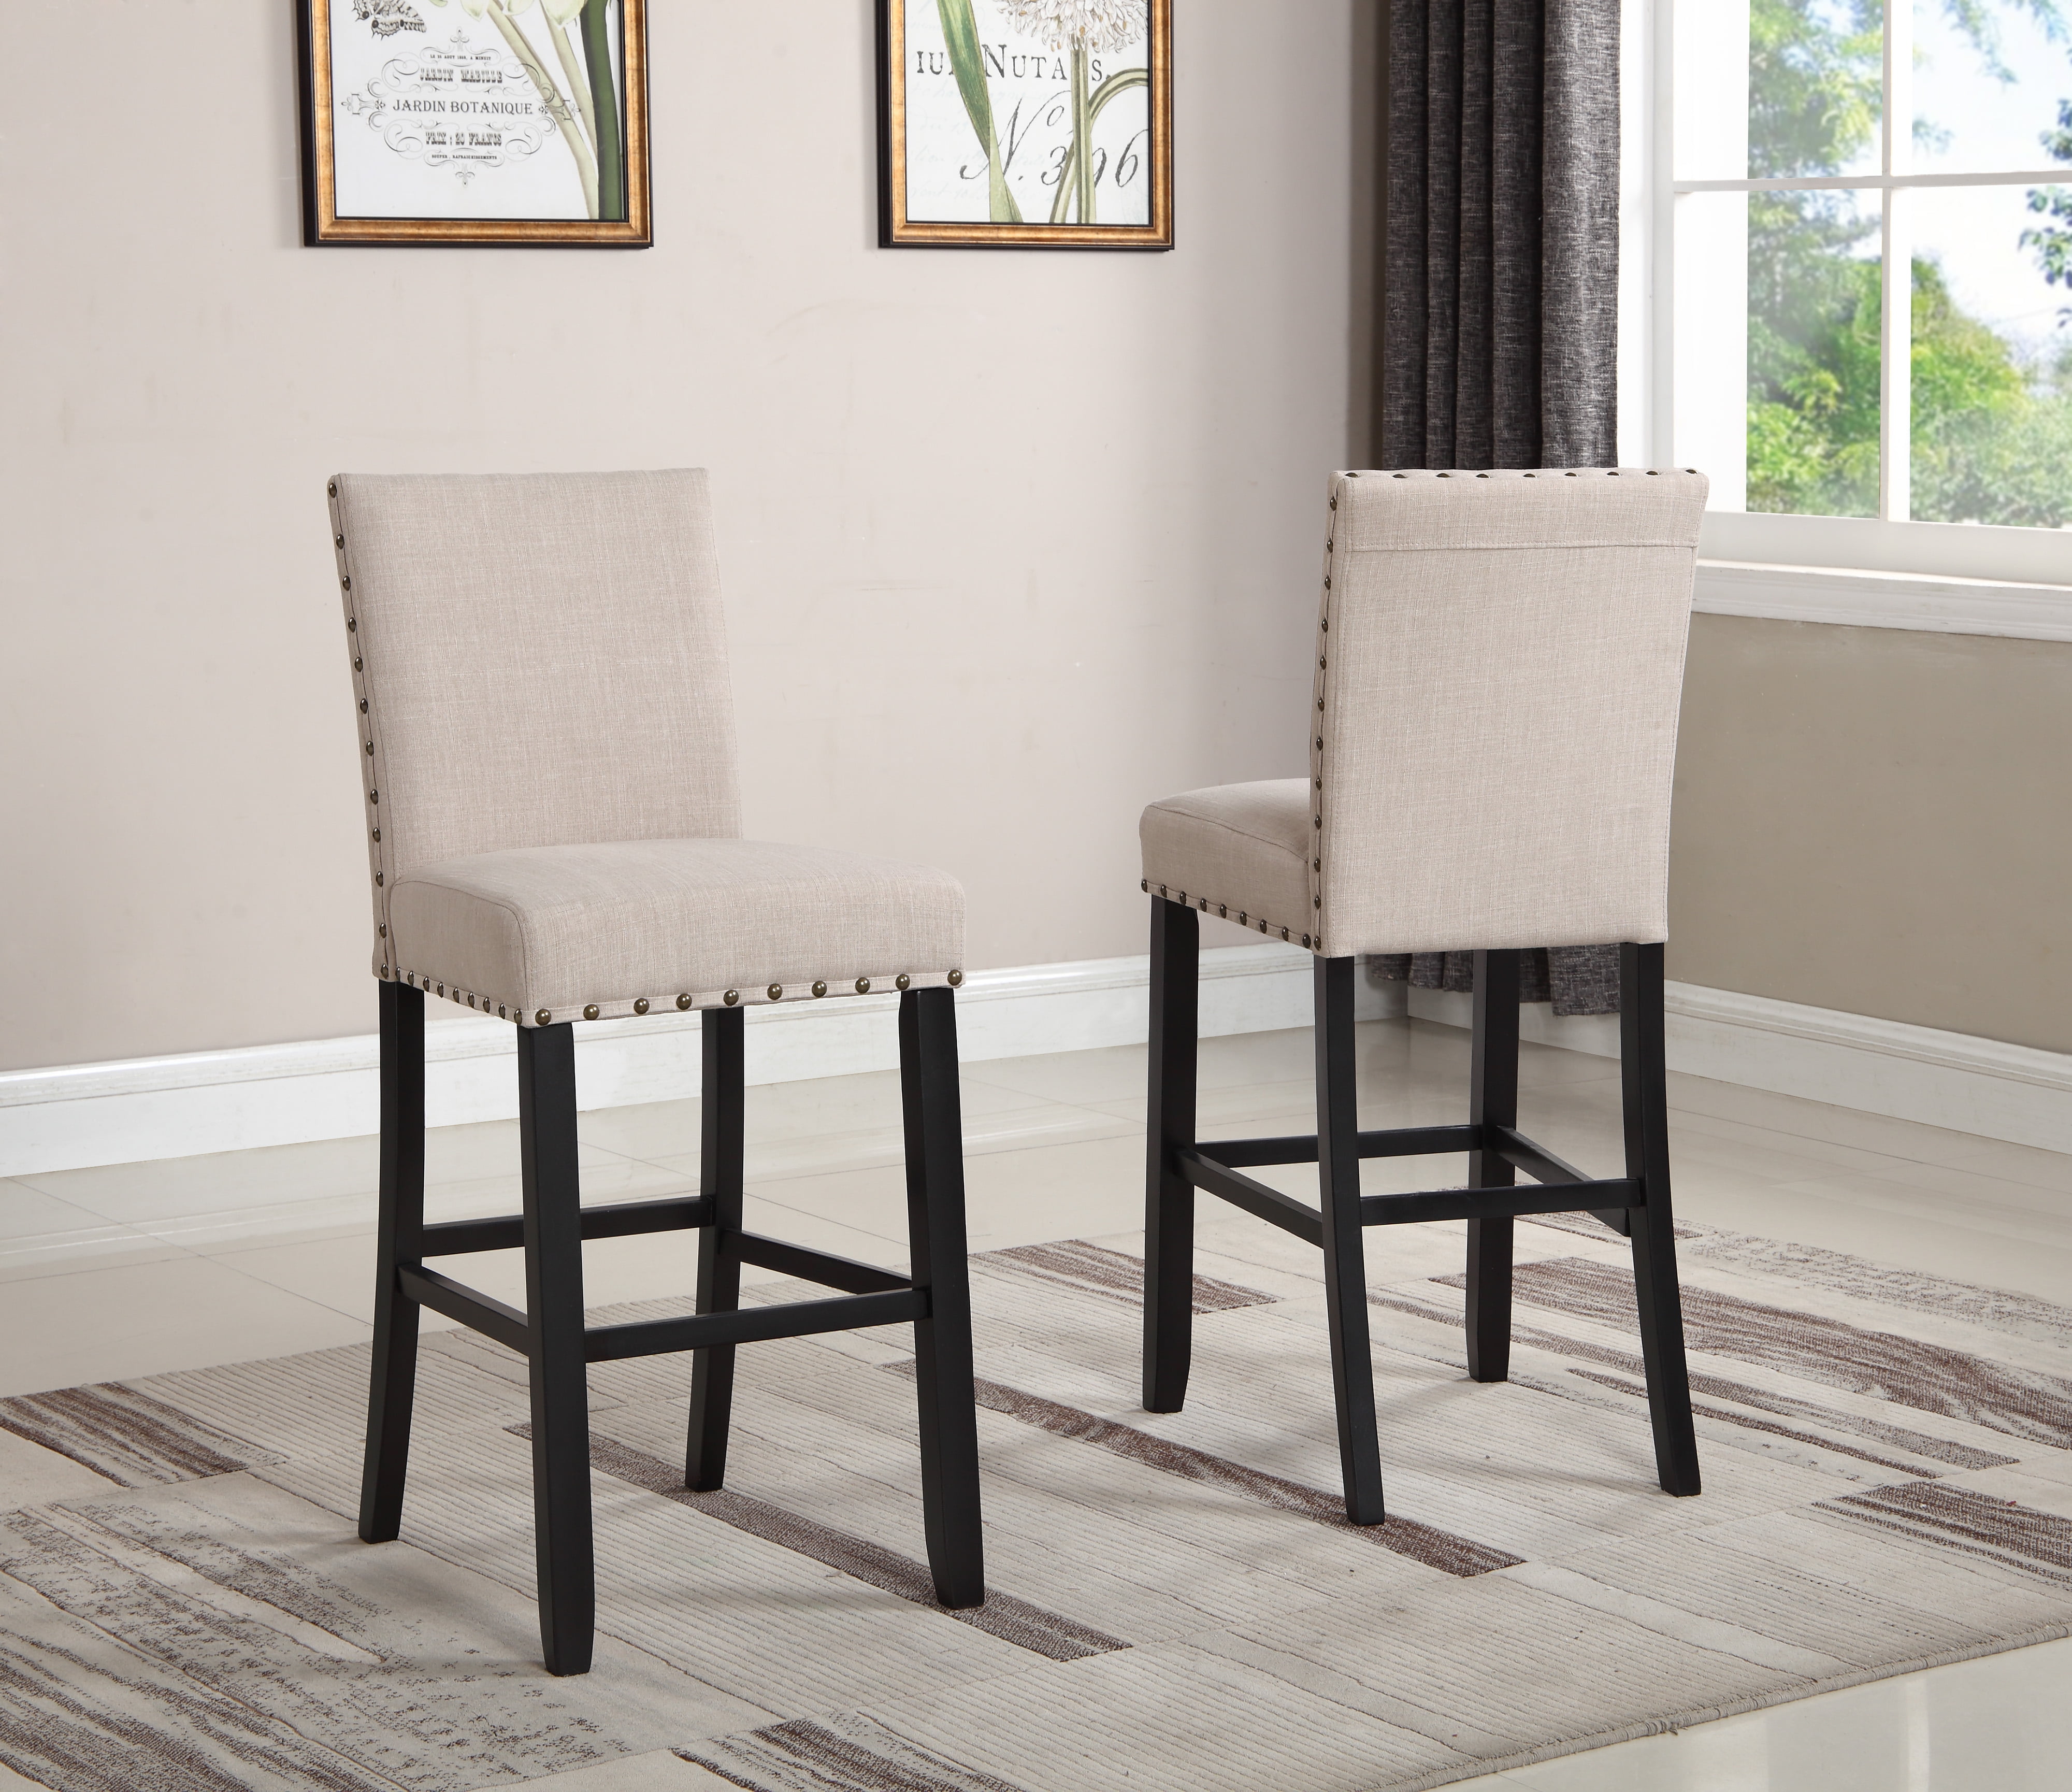 Roundhill Furniture Biony Bar Stool, Leather Bar Stools With Nailhead Trim